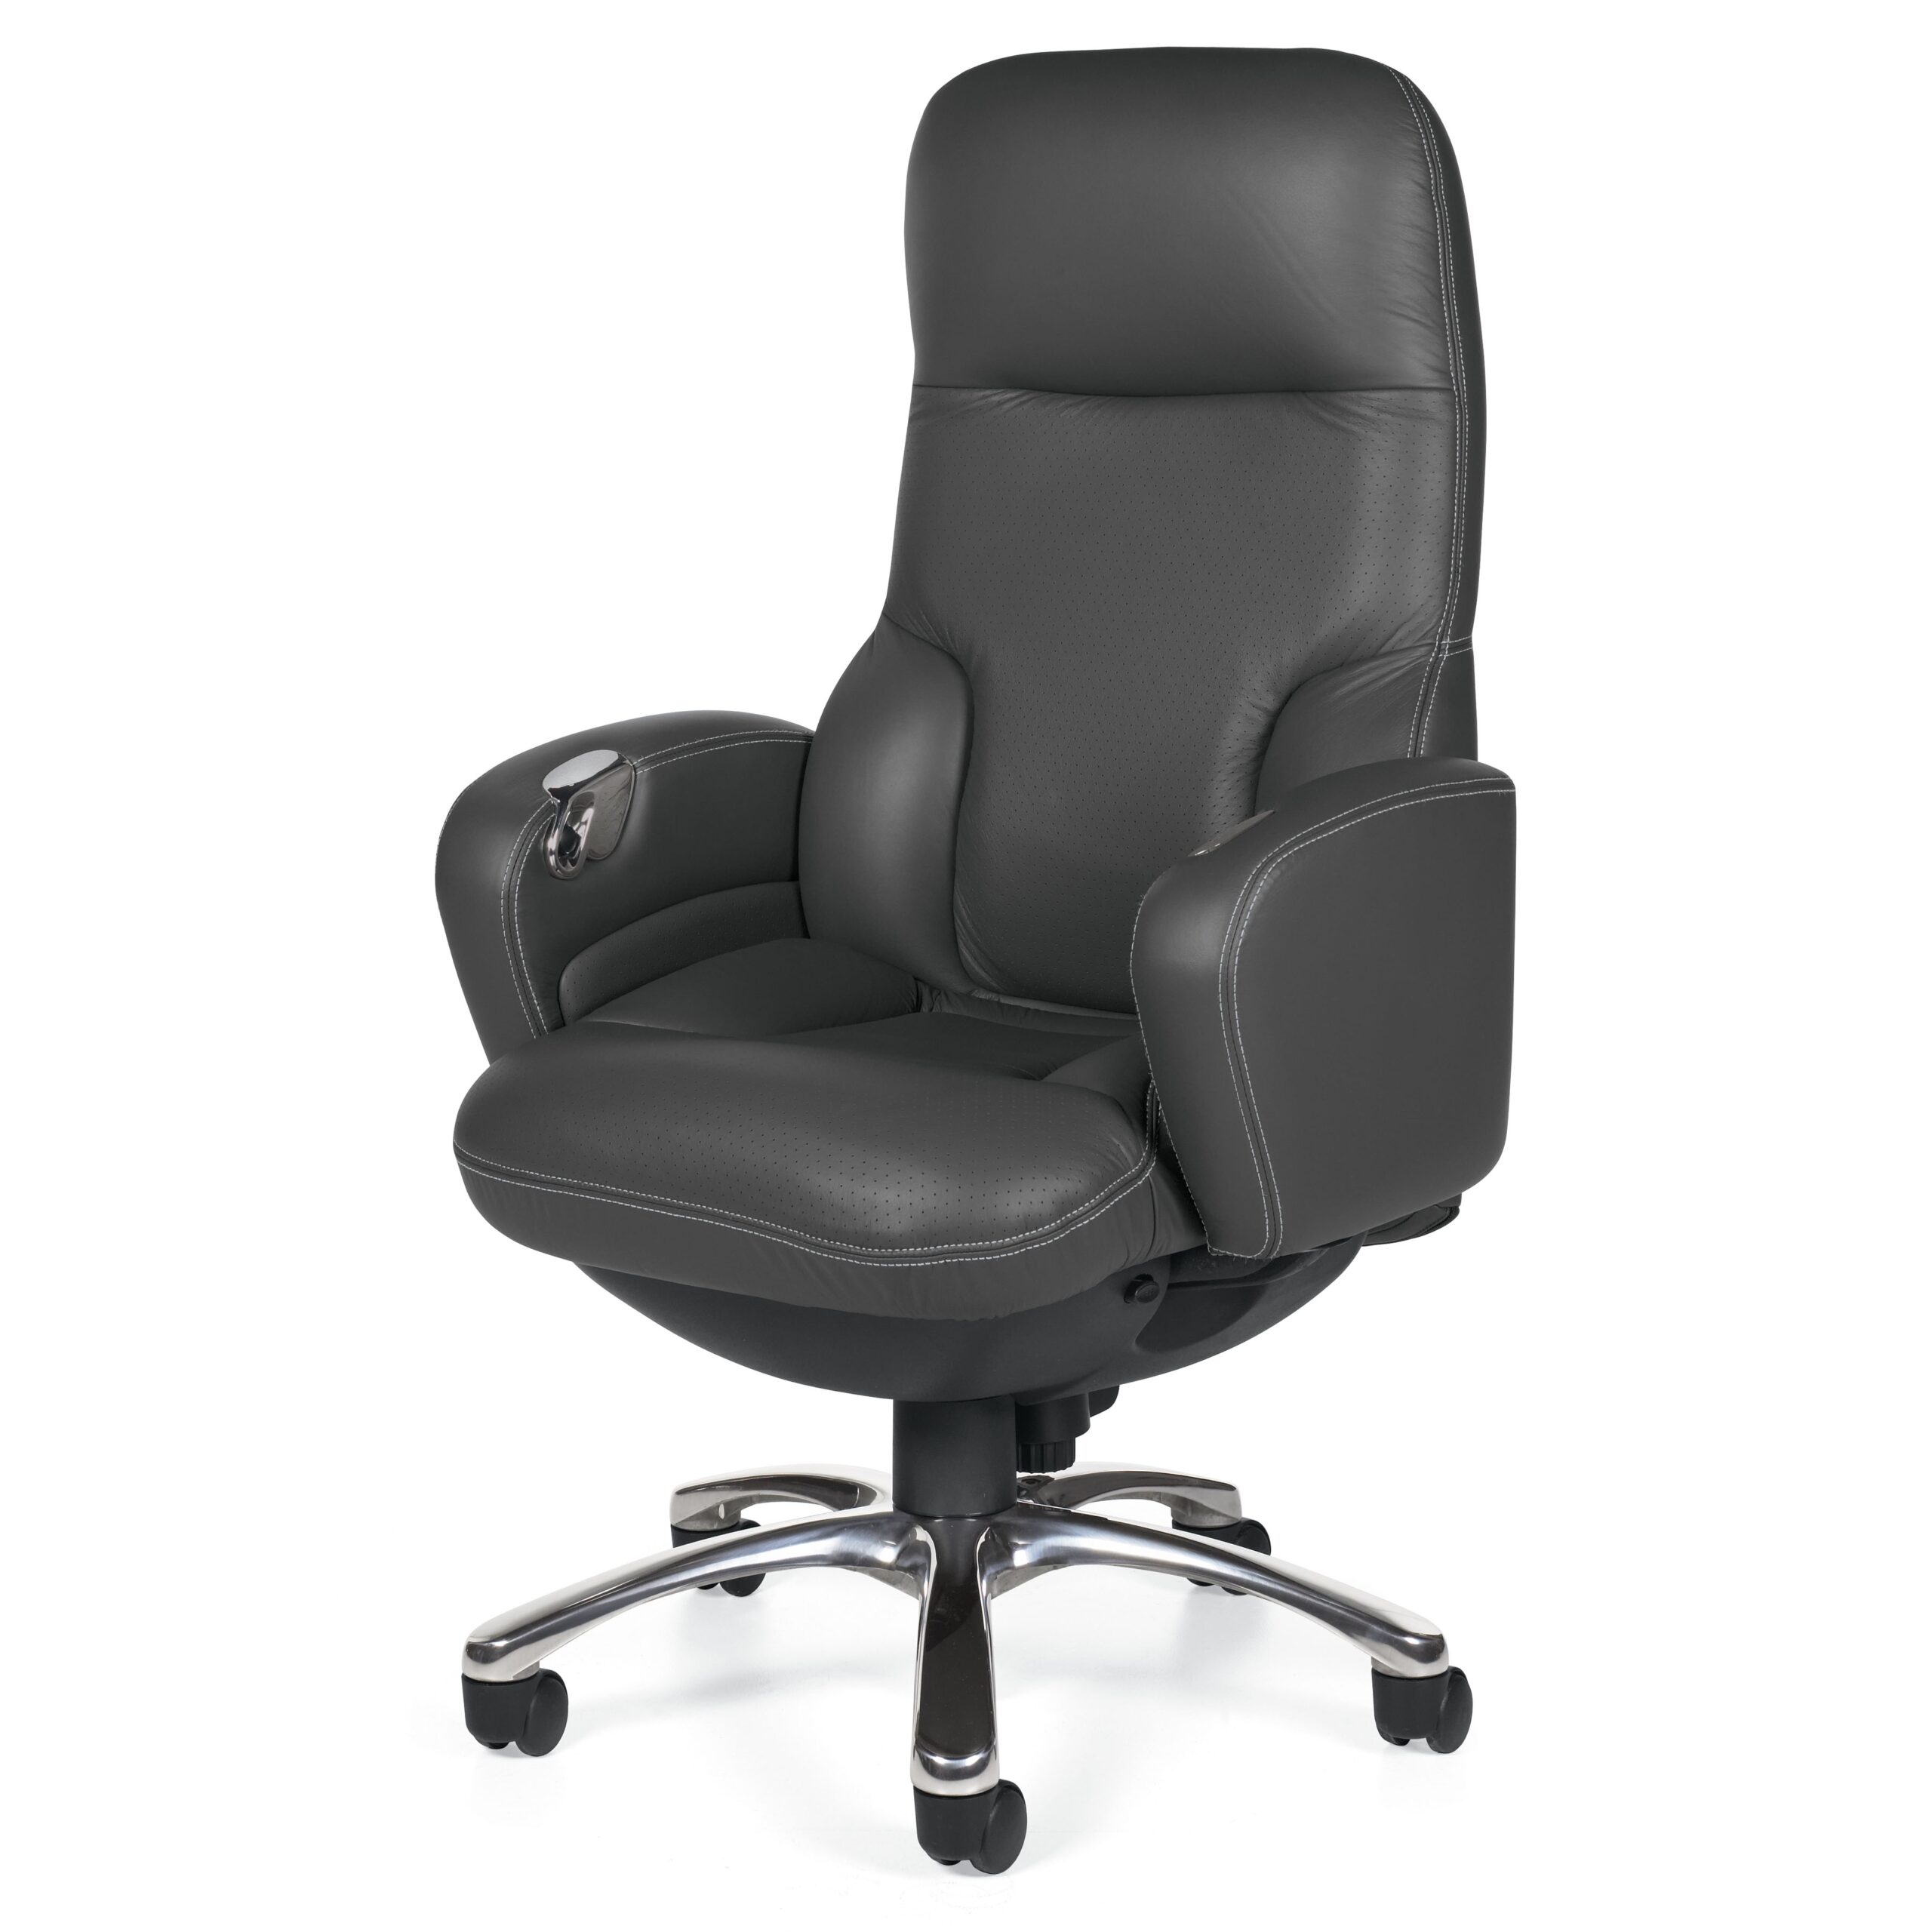 Global Executive Office Chairs